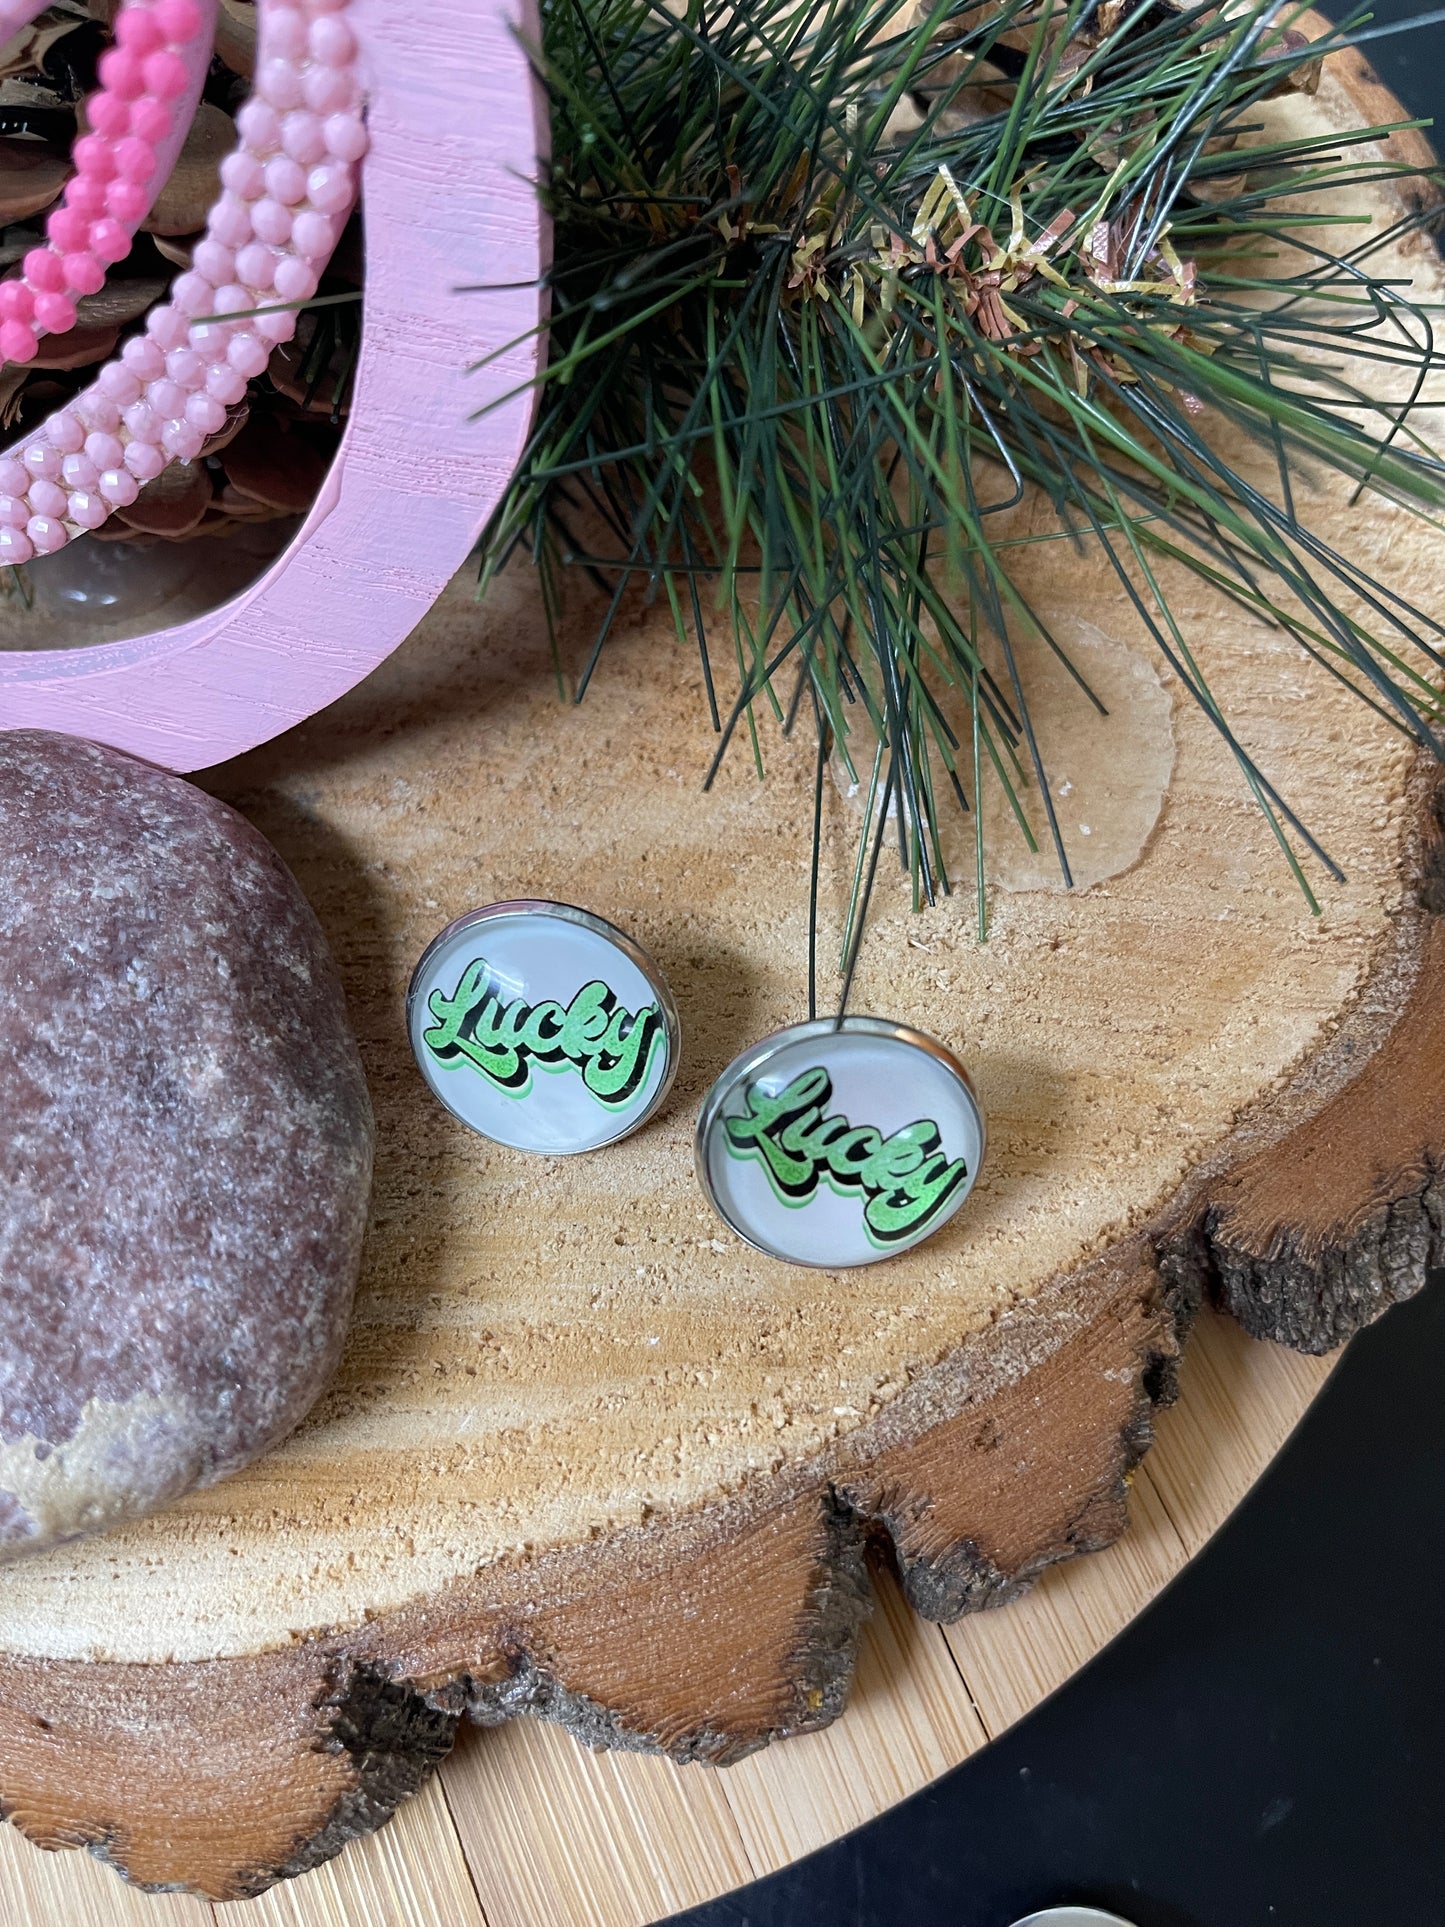 Lucky Leprechaun Collection Stud Earrings (3 to choose)Pink tiful of LOVE